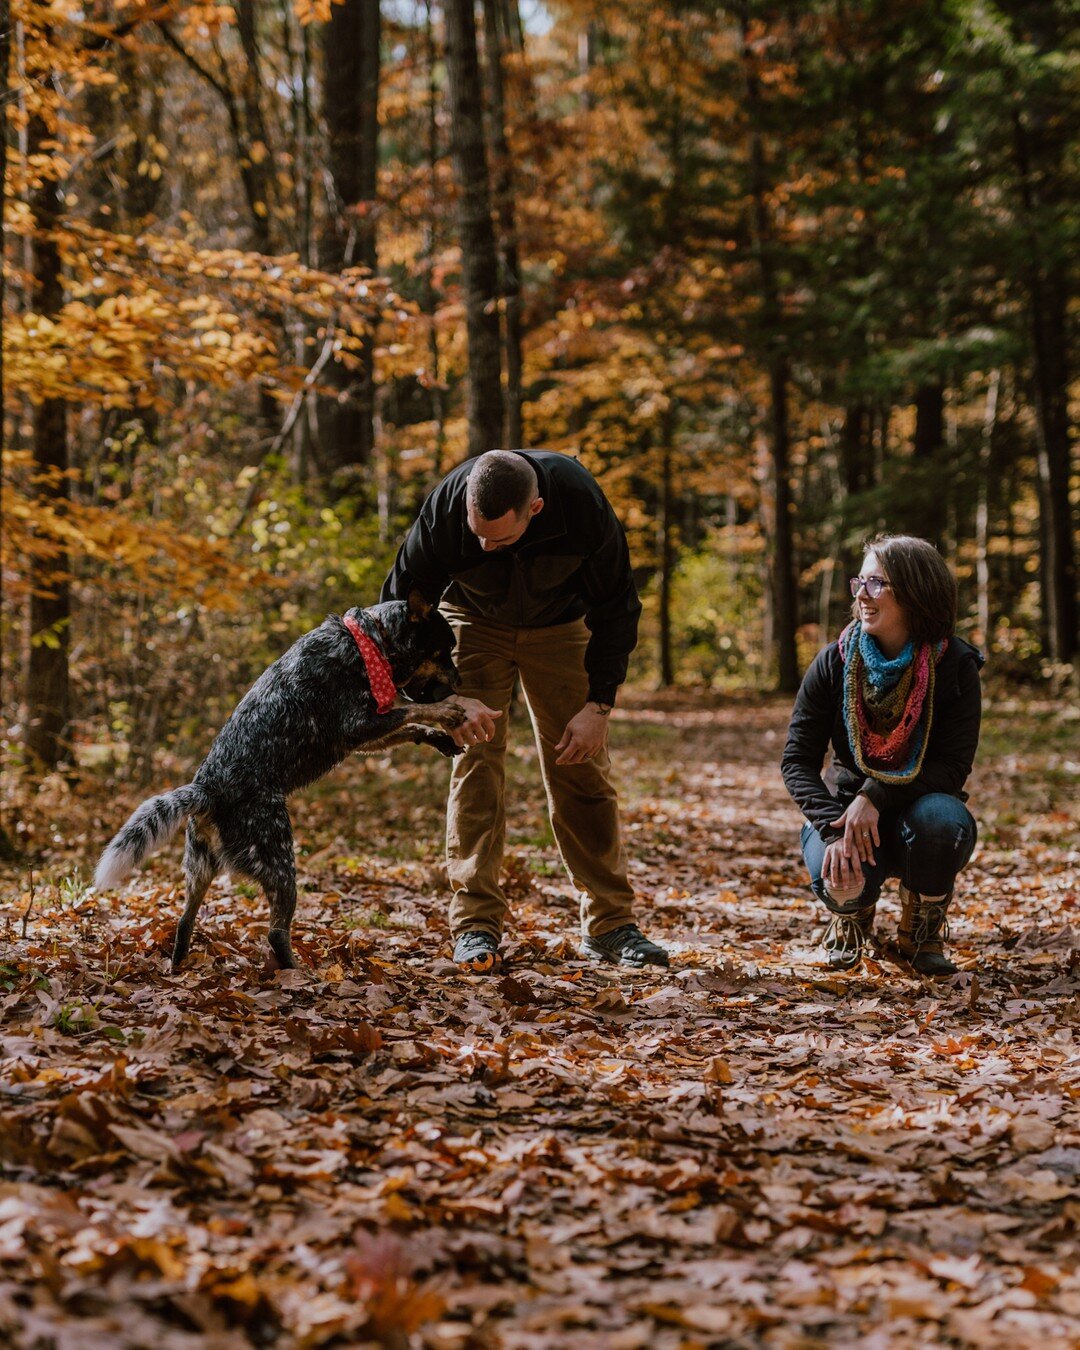 what i said: of course you can bring your dog!⠀⠀⠀⠀⠀⠀⠀⠀⠀
what i meant: omg PLEASE BRING YOUR DOG?!?⠀⠀⠀⠀⠀⠀⠀⠀⠀
.⠀⠀⠀⠀⠀⠀⠀⠀⠀
.⠀⠀⠀⠀⠀⠀⠀⠀⠀
.⠀⠀⠀⠀⠀⠀⠀⠀⠀
.⠀⠀⠀⠀⠀⠀⠀⠀⠀
.⠀⠀⠀⠀⠀⠀⠀⠀⠀
.⠀⠀⠀⠀⠀⠀⠀⠀⠀
#planoly  #portrait #coupleportrait #portraitphotographer #upstateny #upstat